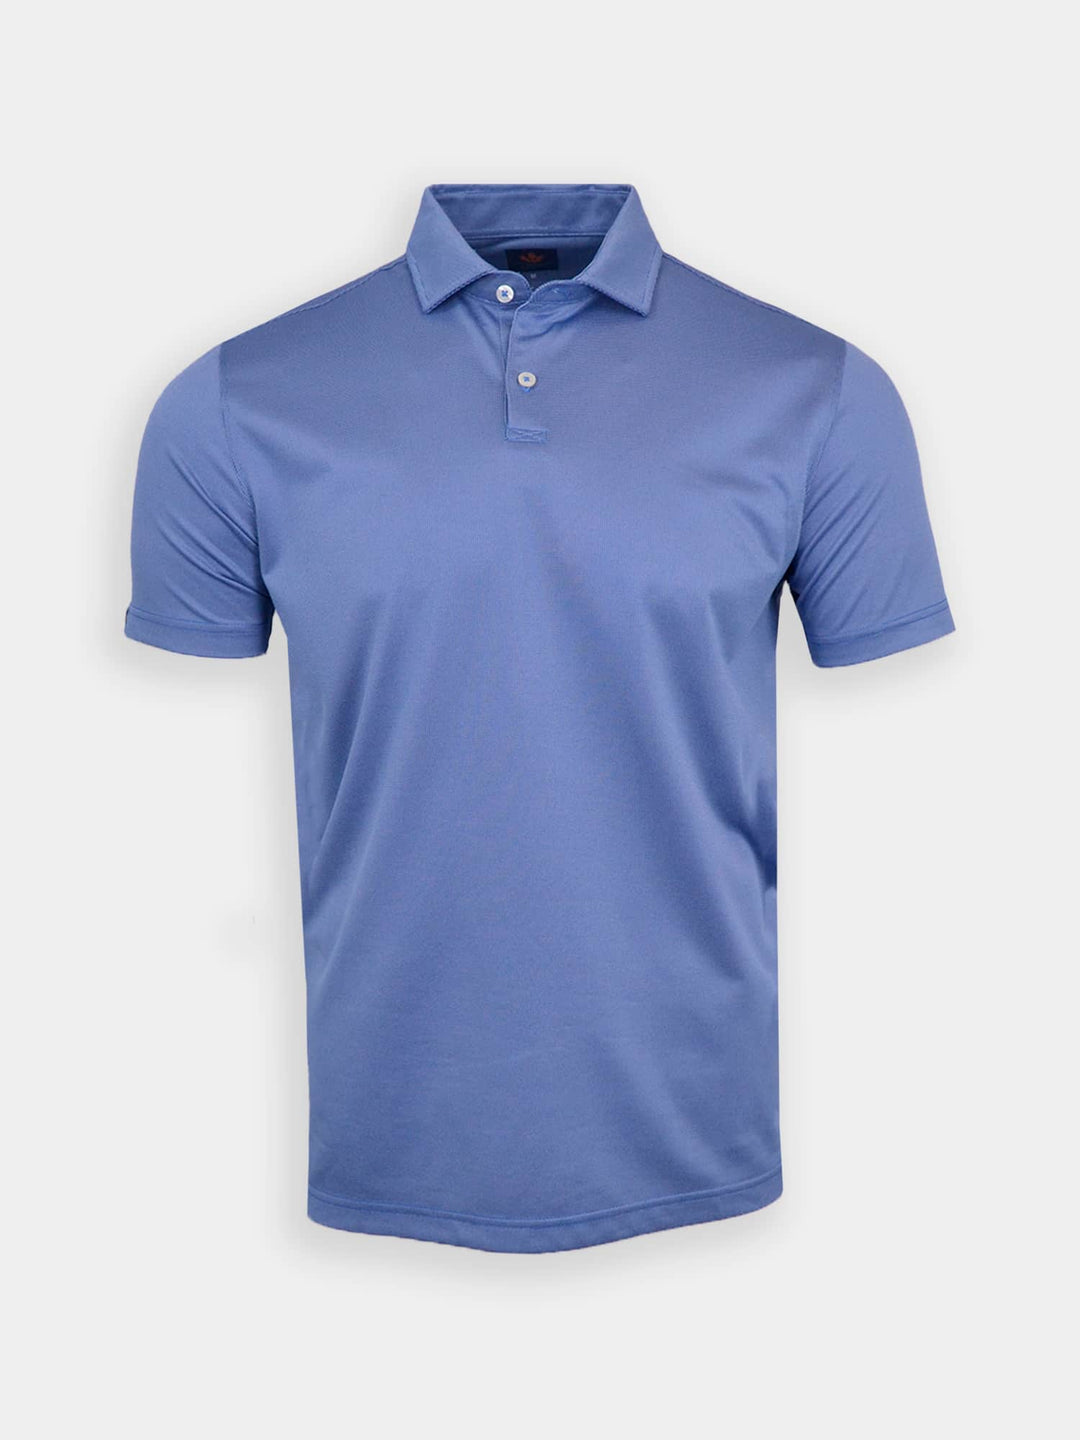 Donald Ross Sport Fit Mens Short Sleeve Donny Polo - BLUE WHALE